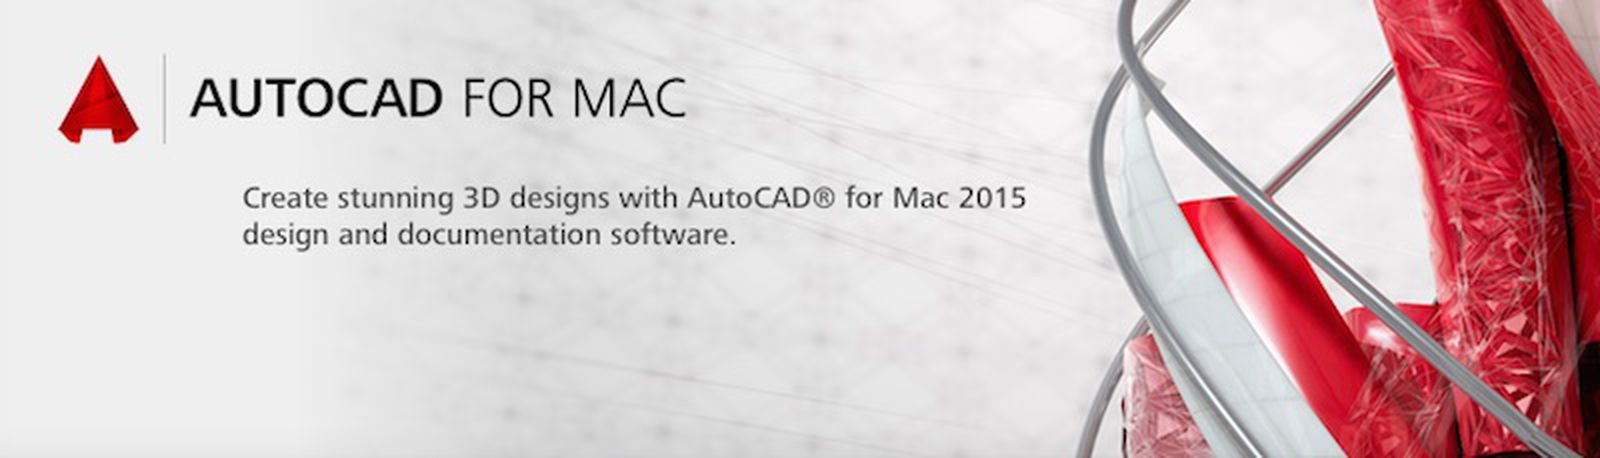 download the last version for mac AutoCAD